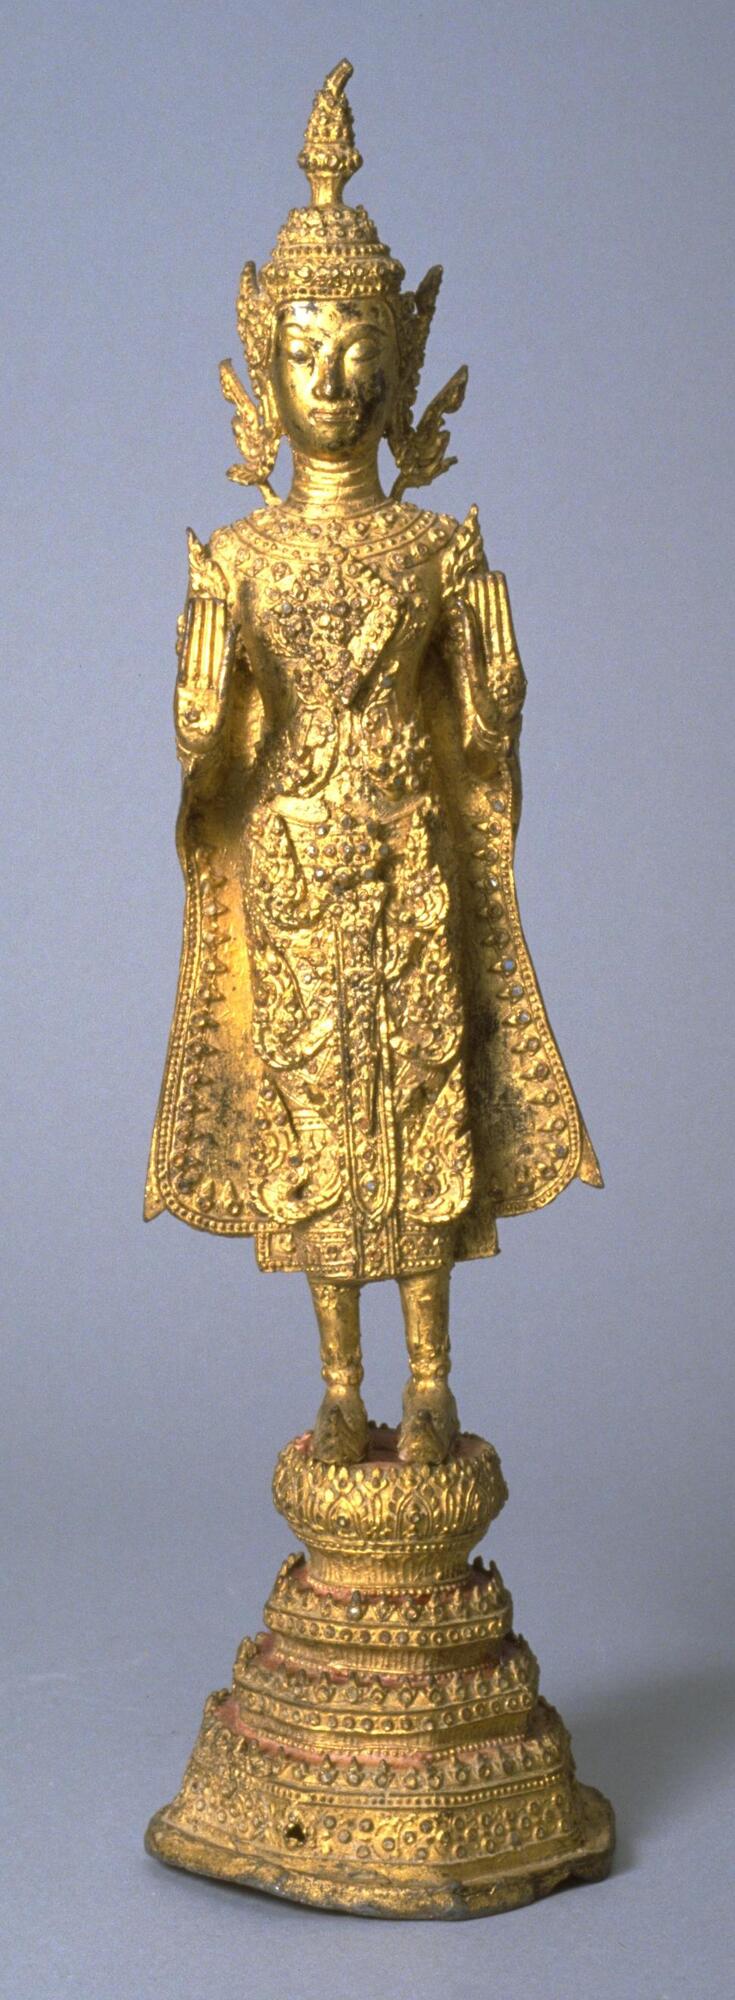 Gilded brass (or gilded copper alloy) standing Buddha on lotus pedestal with both hands raised in abhaya mudra.